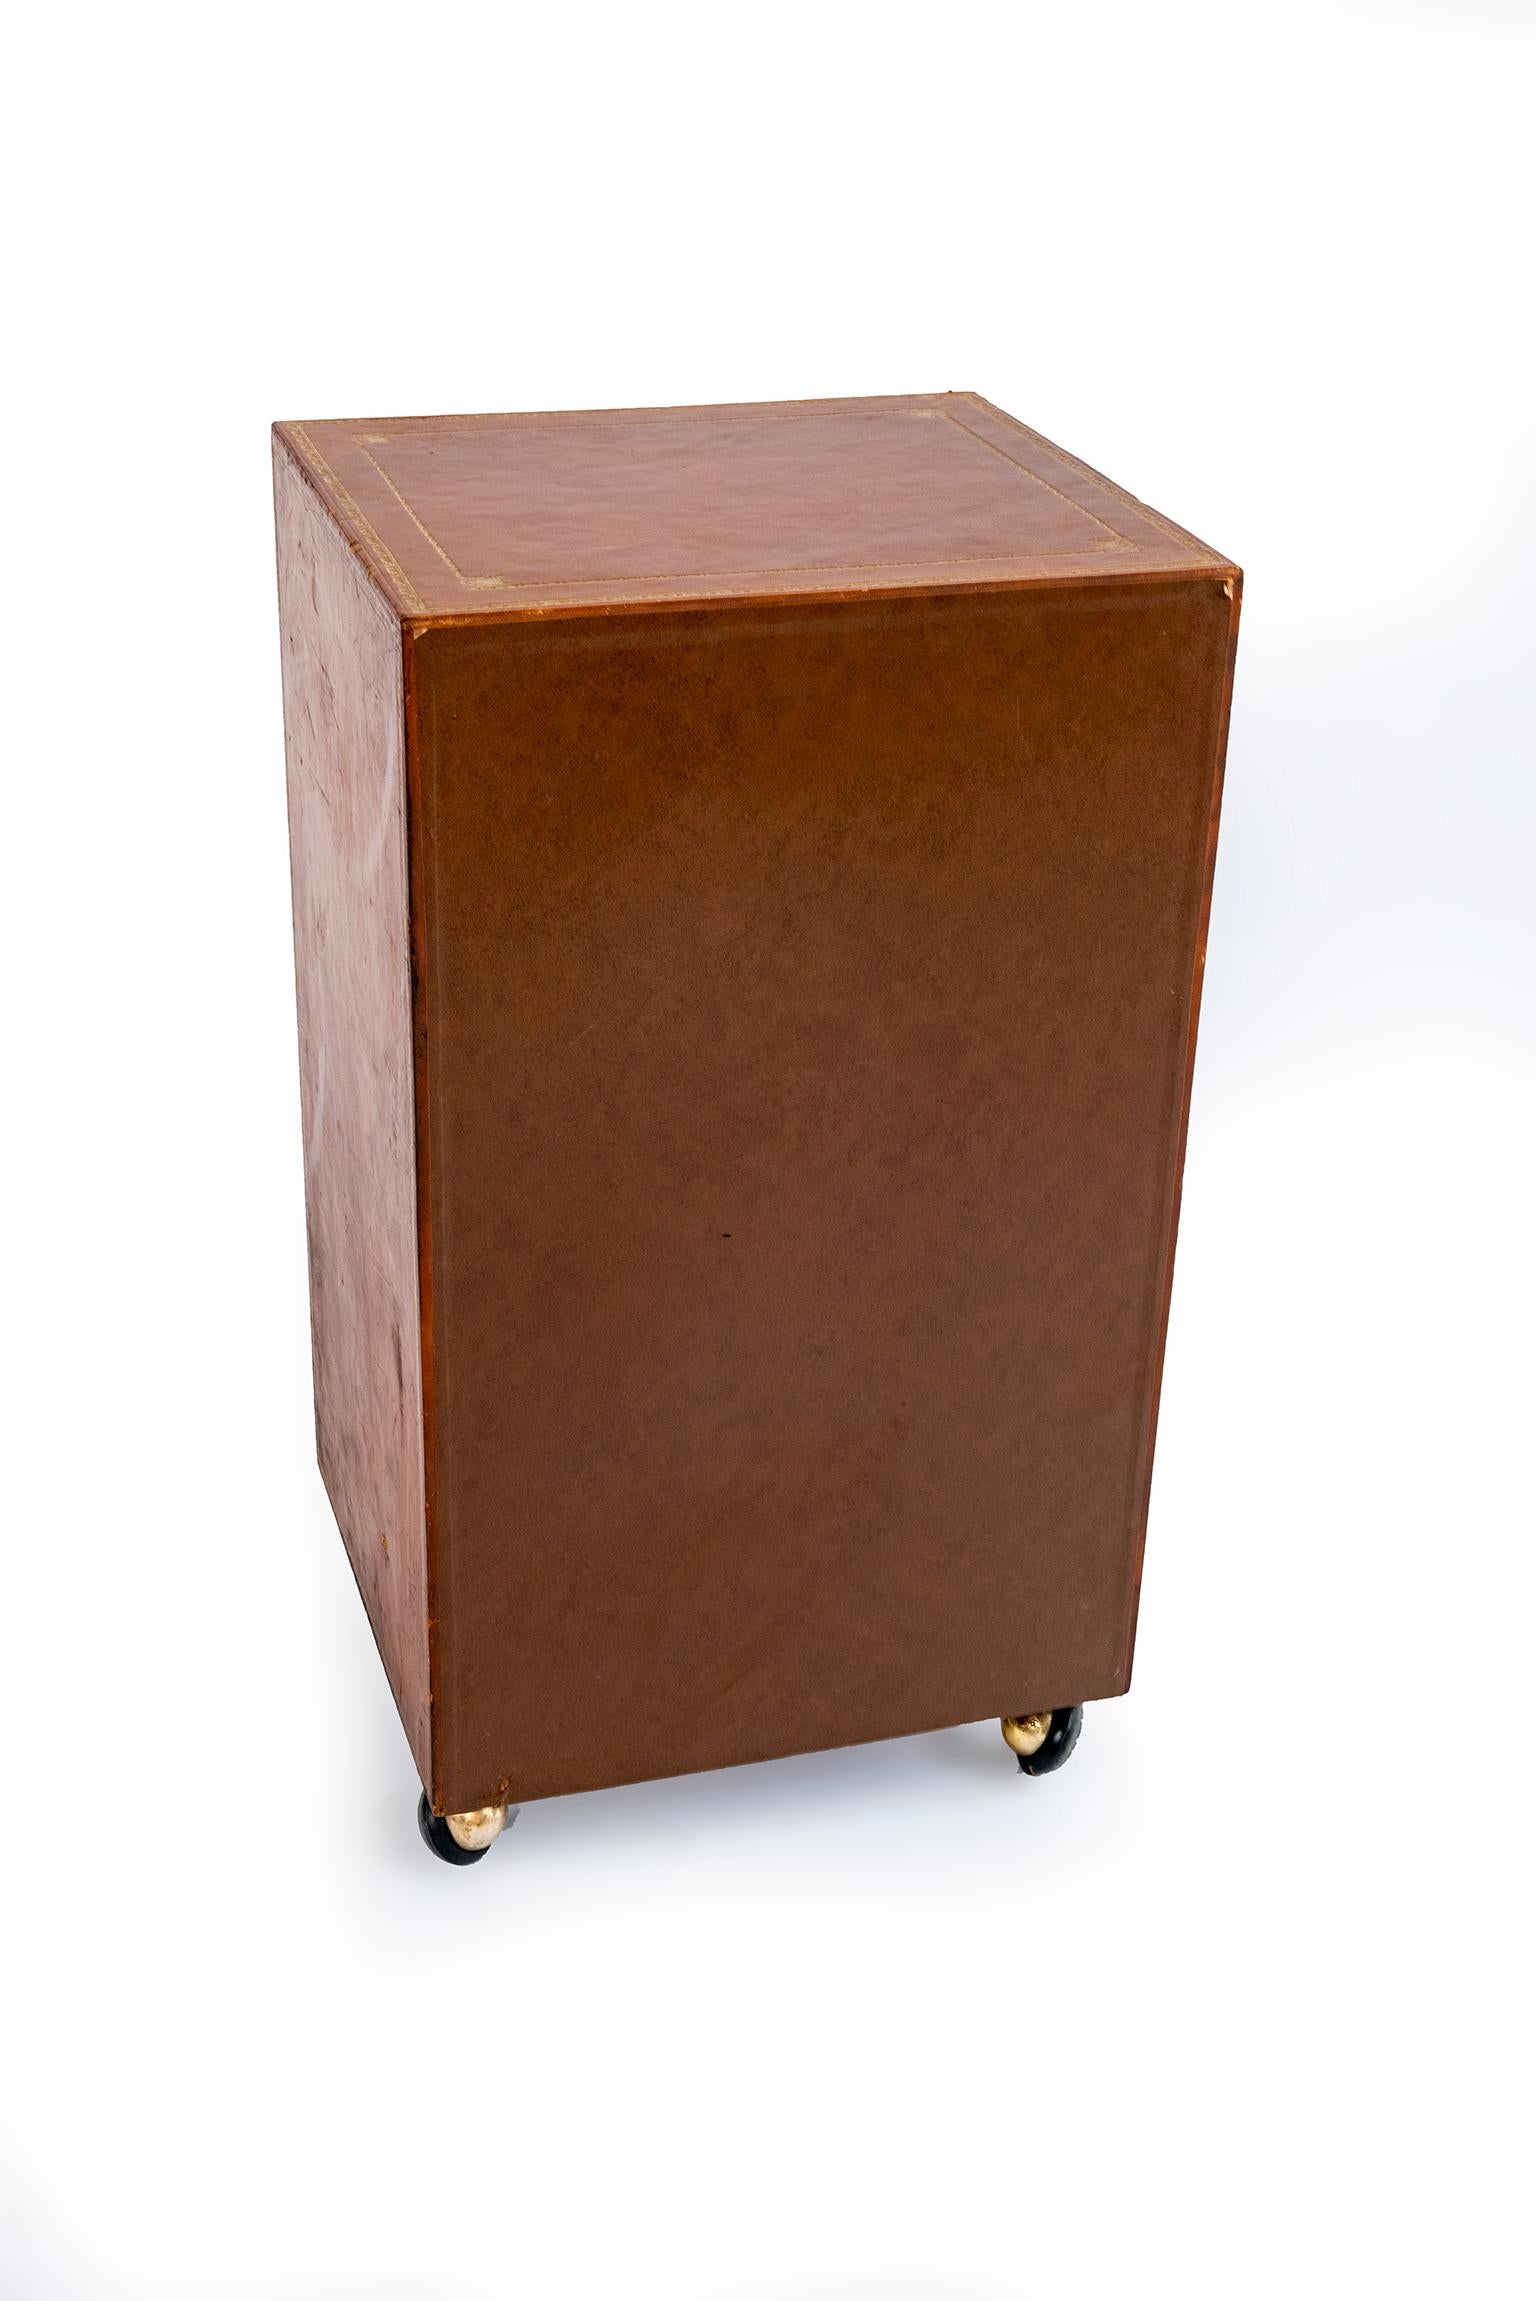 Pair of Leather Document Cabinets or Side Tables on Wheels For Sale 2